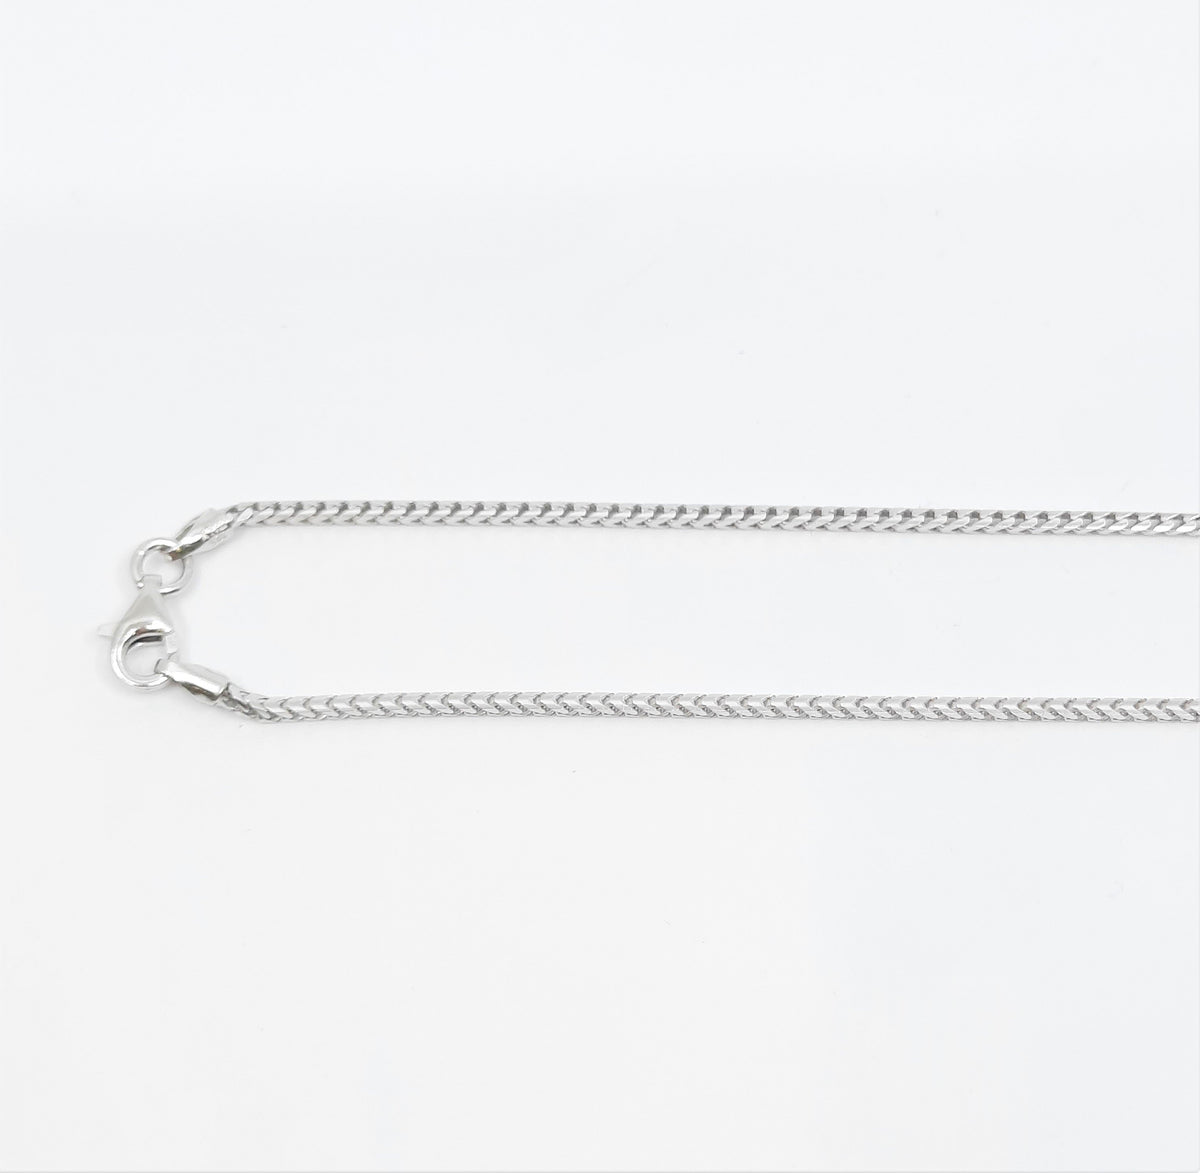 925 Sterling Silver 1.5mm Rhodium Plated Franco Chain with Lobster Clasp - 18 Inches